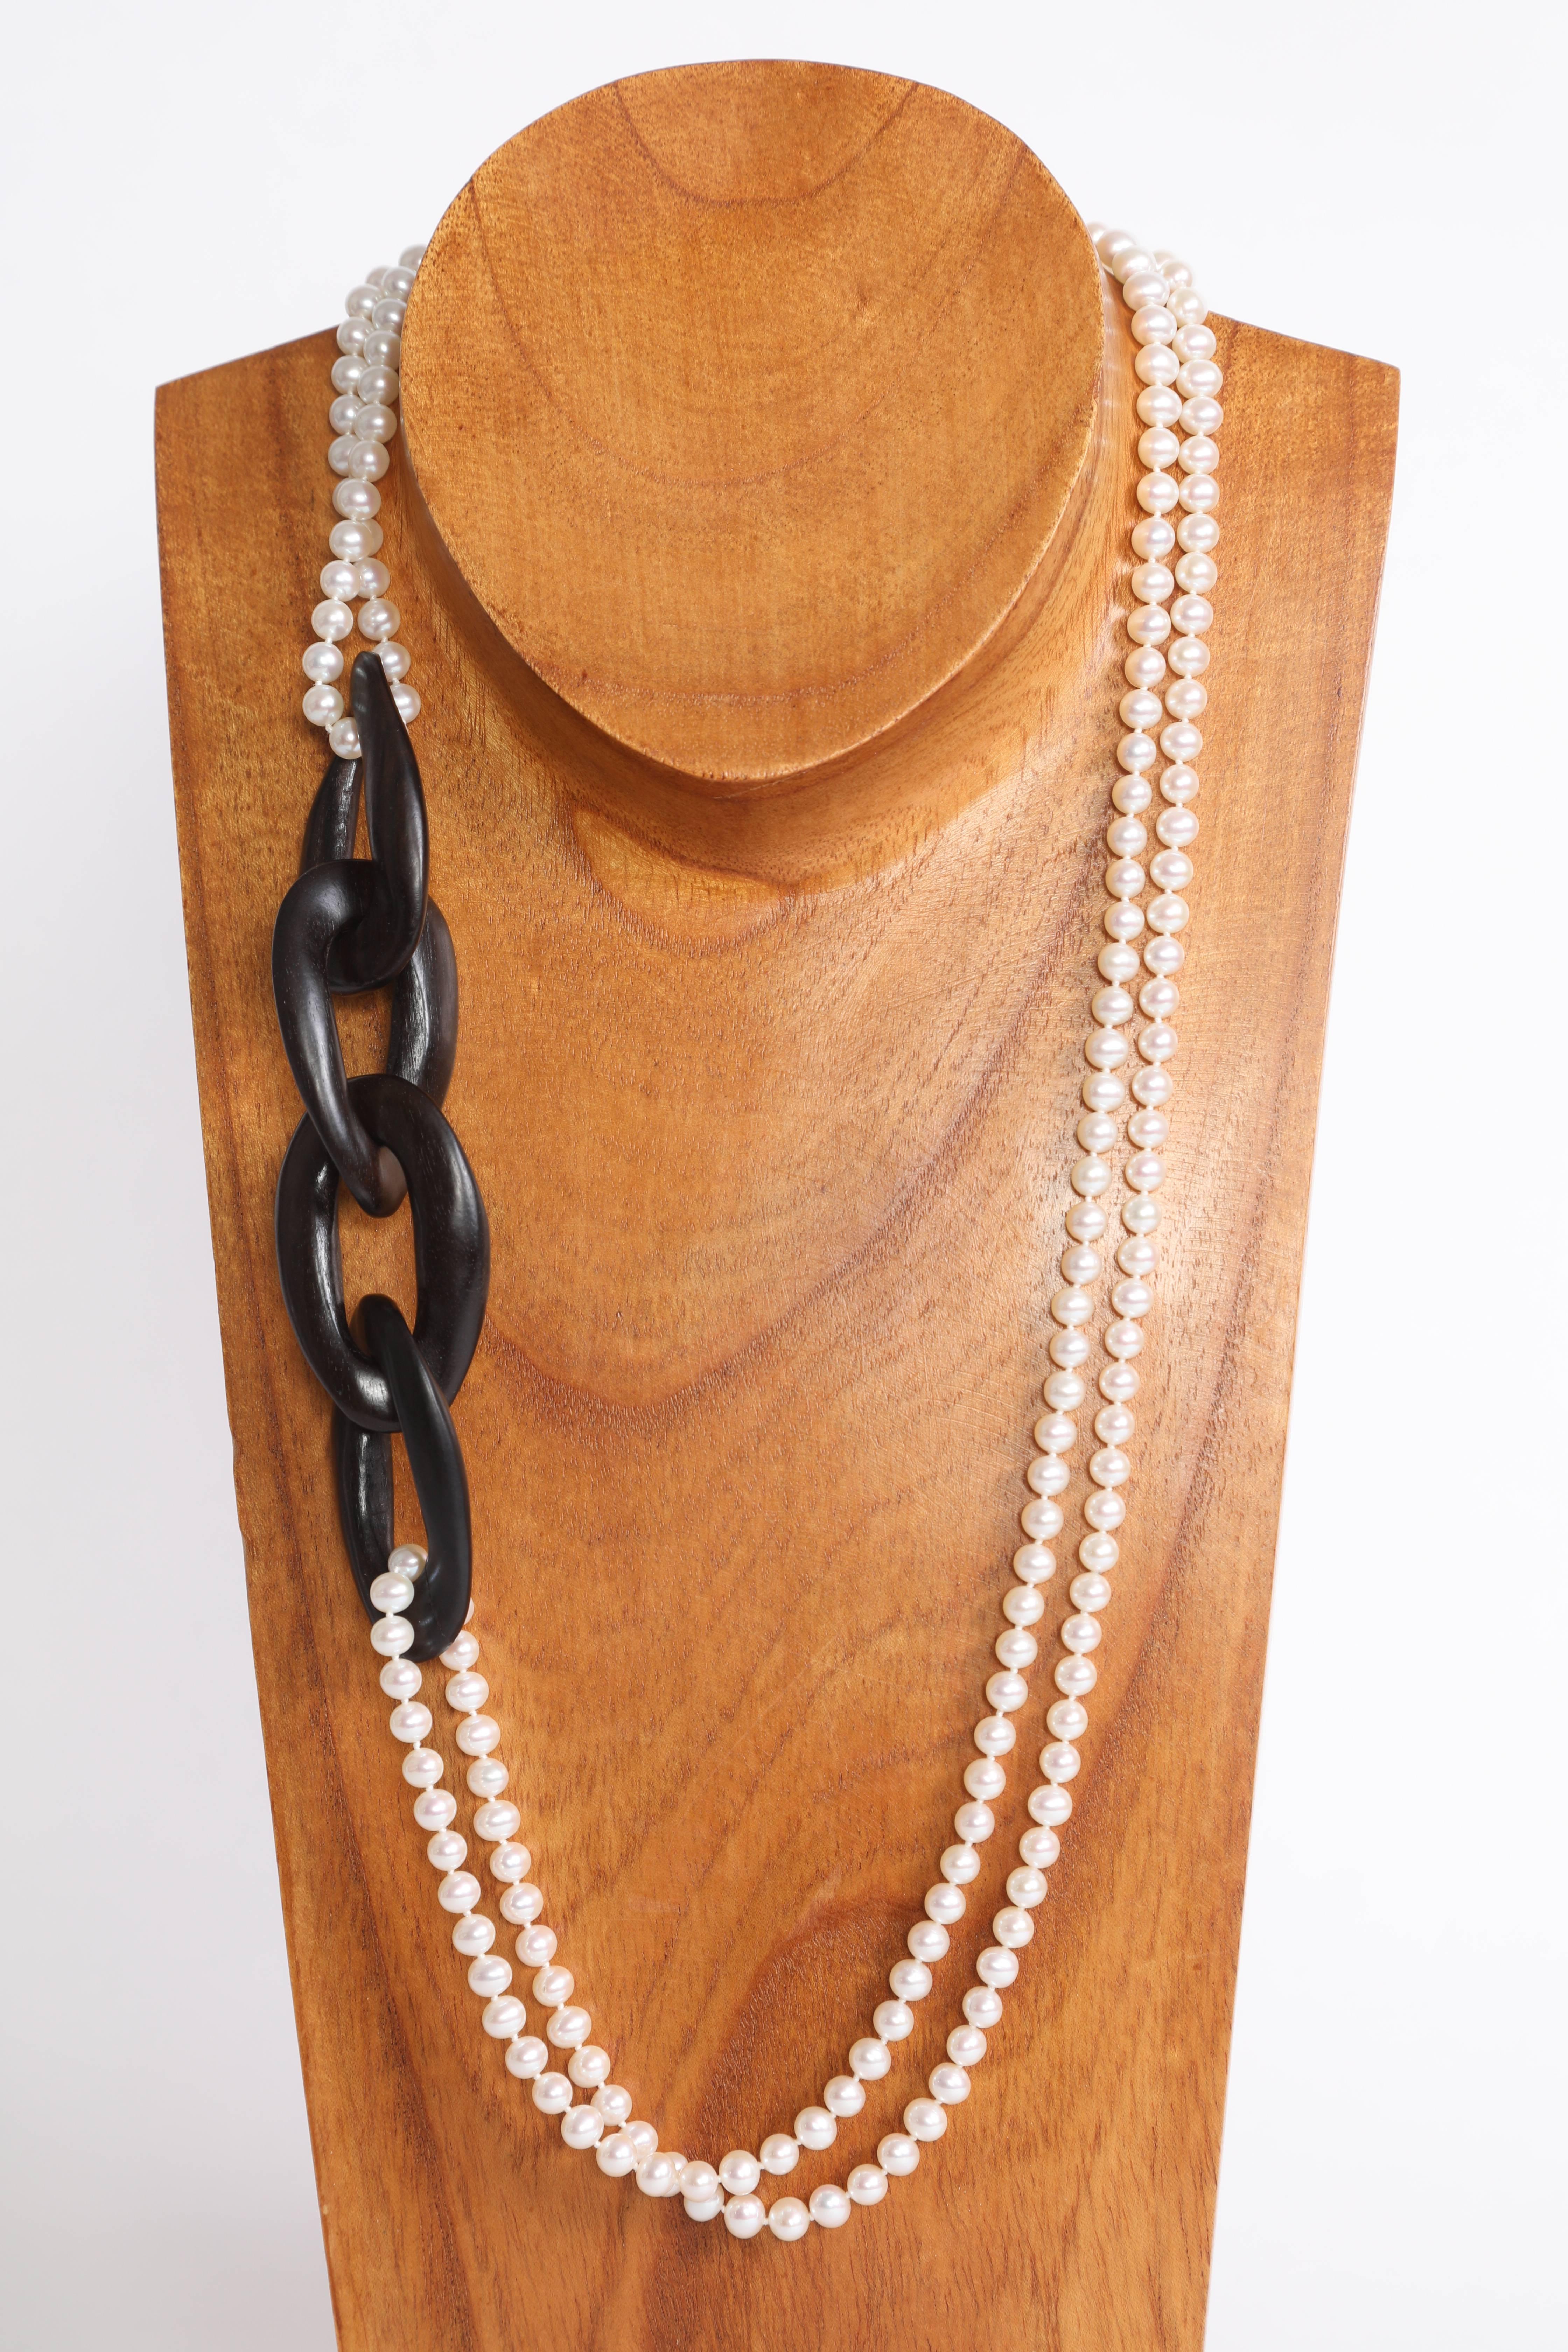 Ebony Wood and Freshwater Pearls ( 6mm) Sautoir.
During the day you can wear it in a relaxed fashion, at night with a cosmopolitan elegance. 
It looks fantastic! 76cm long
Created by Marion jeantet
Price without local taxes.